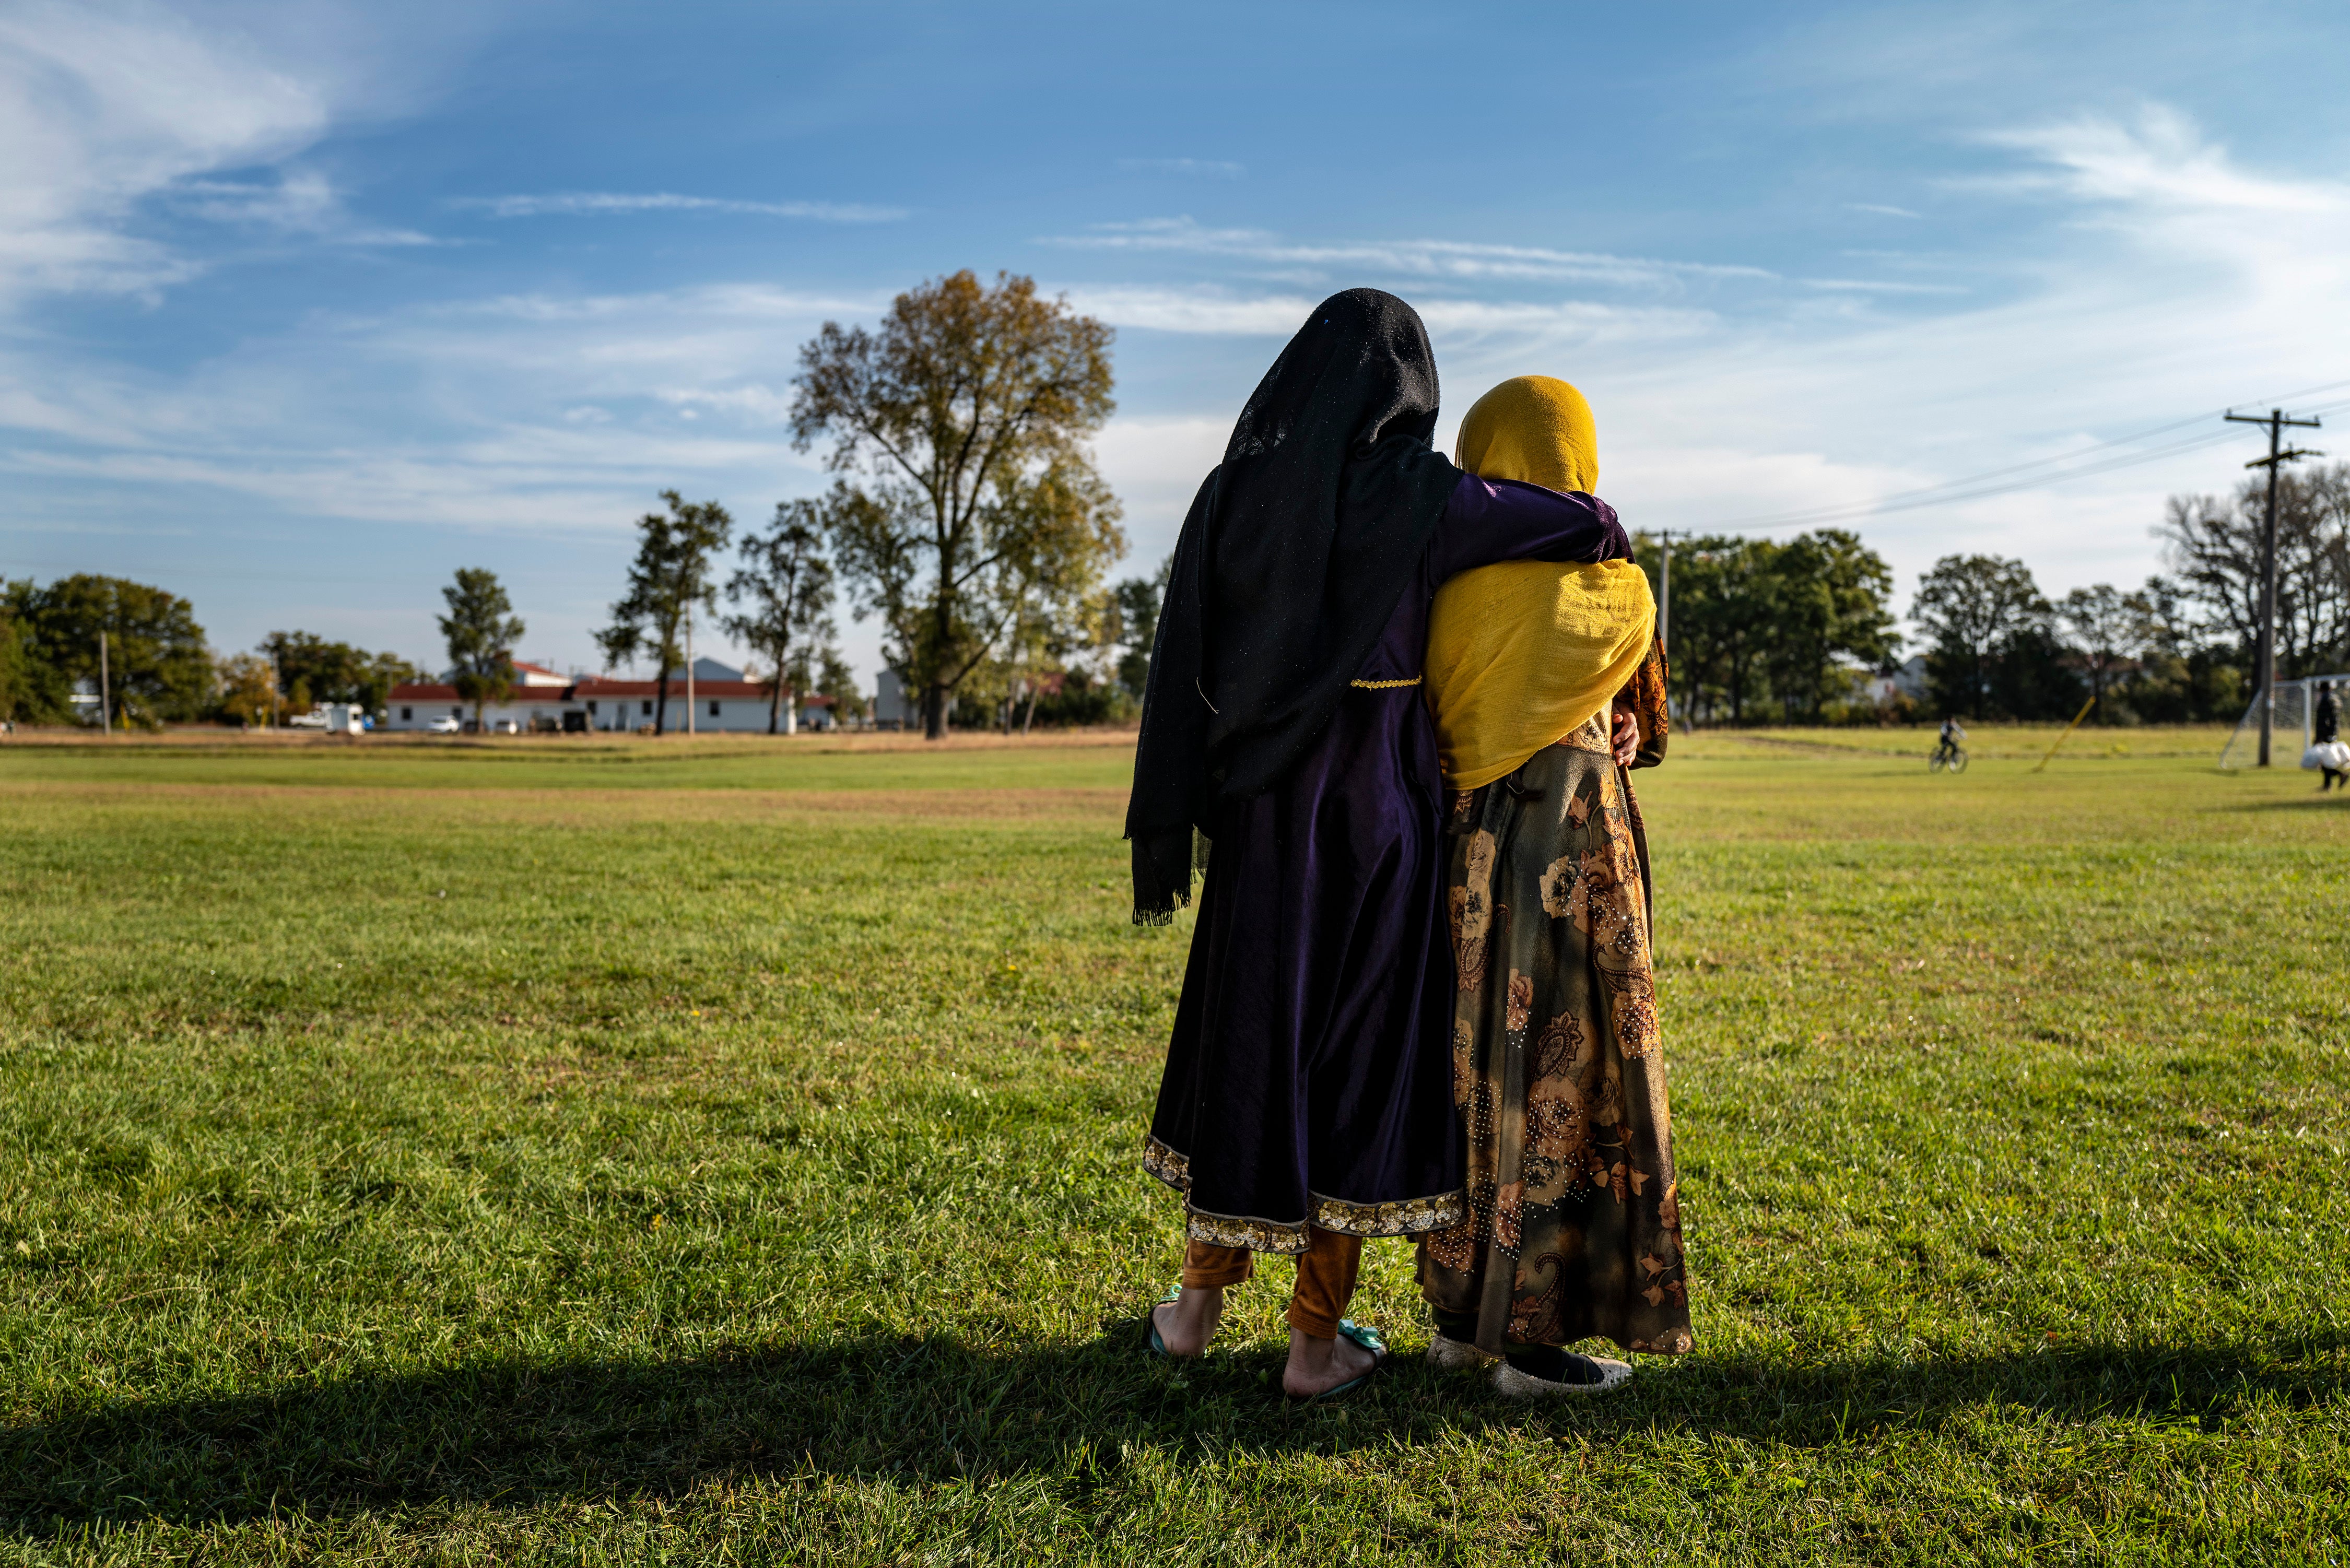 Afghan refugee girls watch football game at an army base in Wisconsin